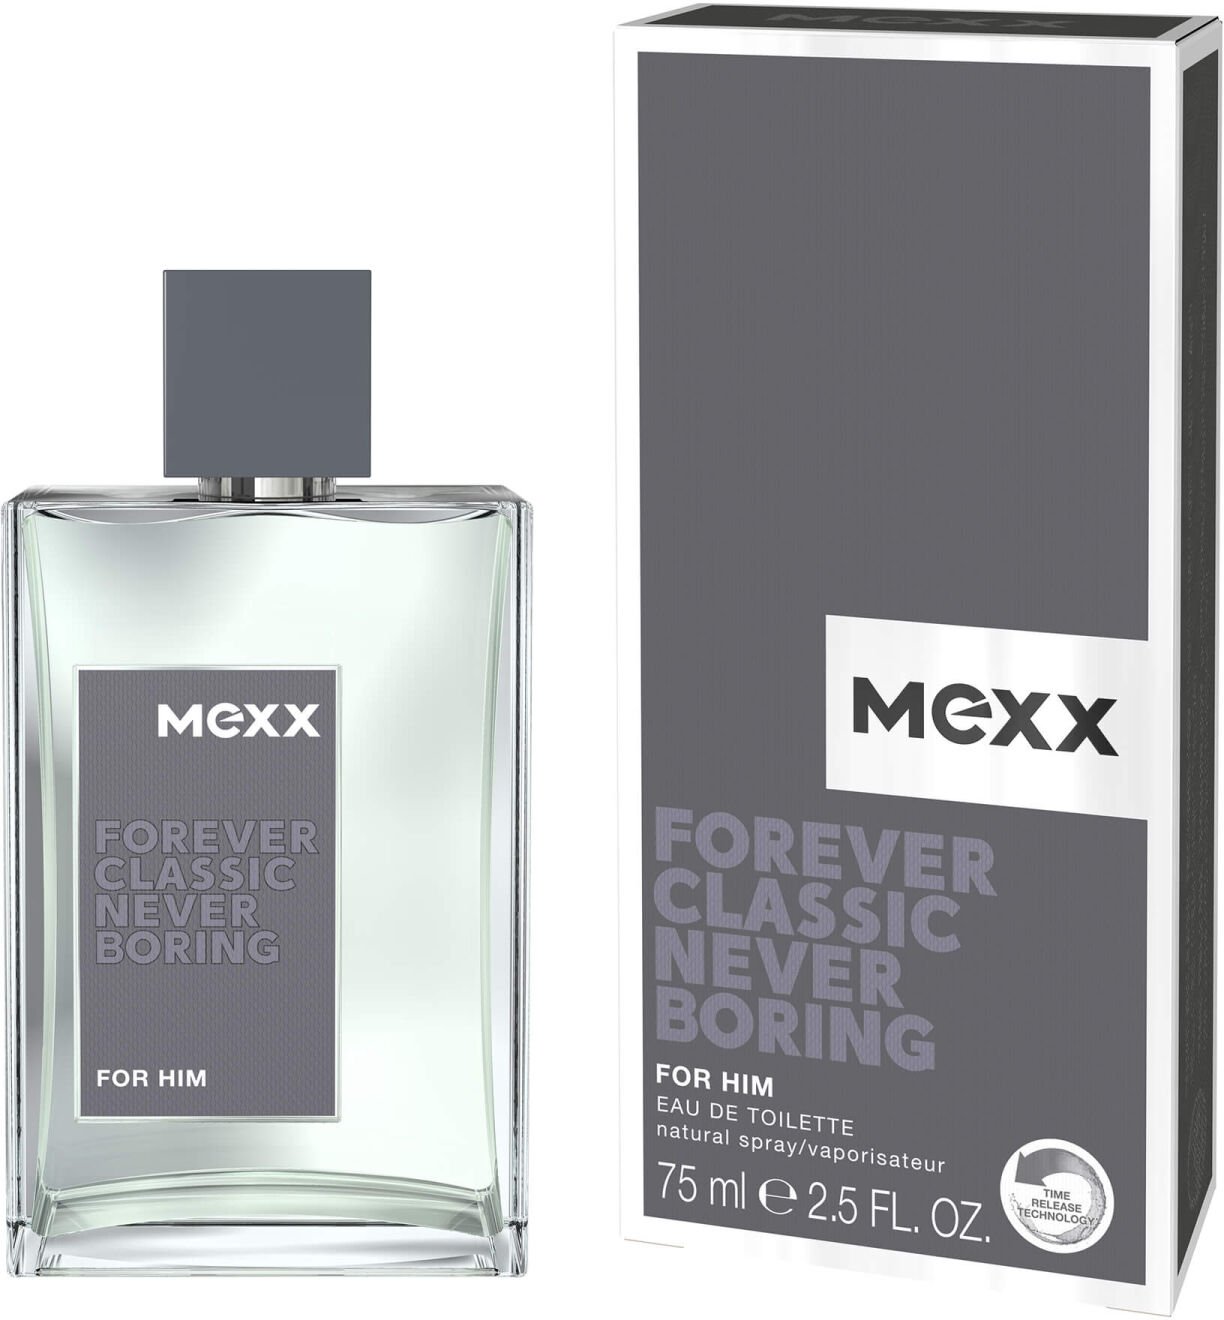 Mexx Forever Classic Never Boring for Him - EDT 50 ml 1